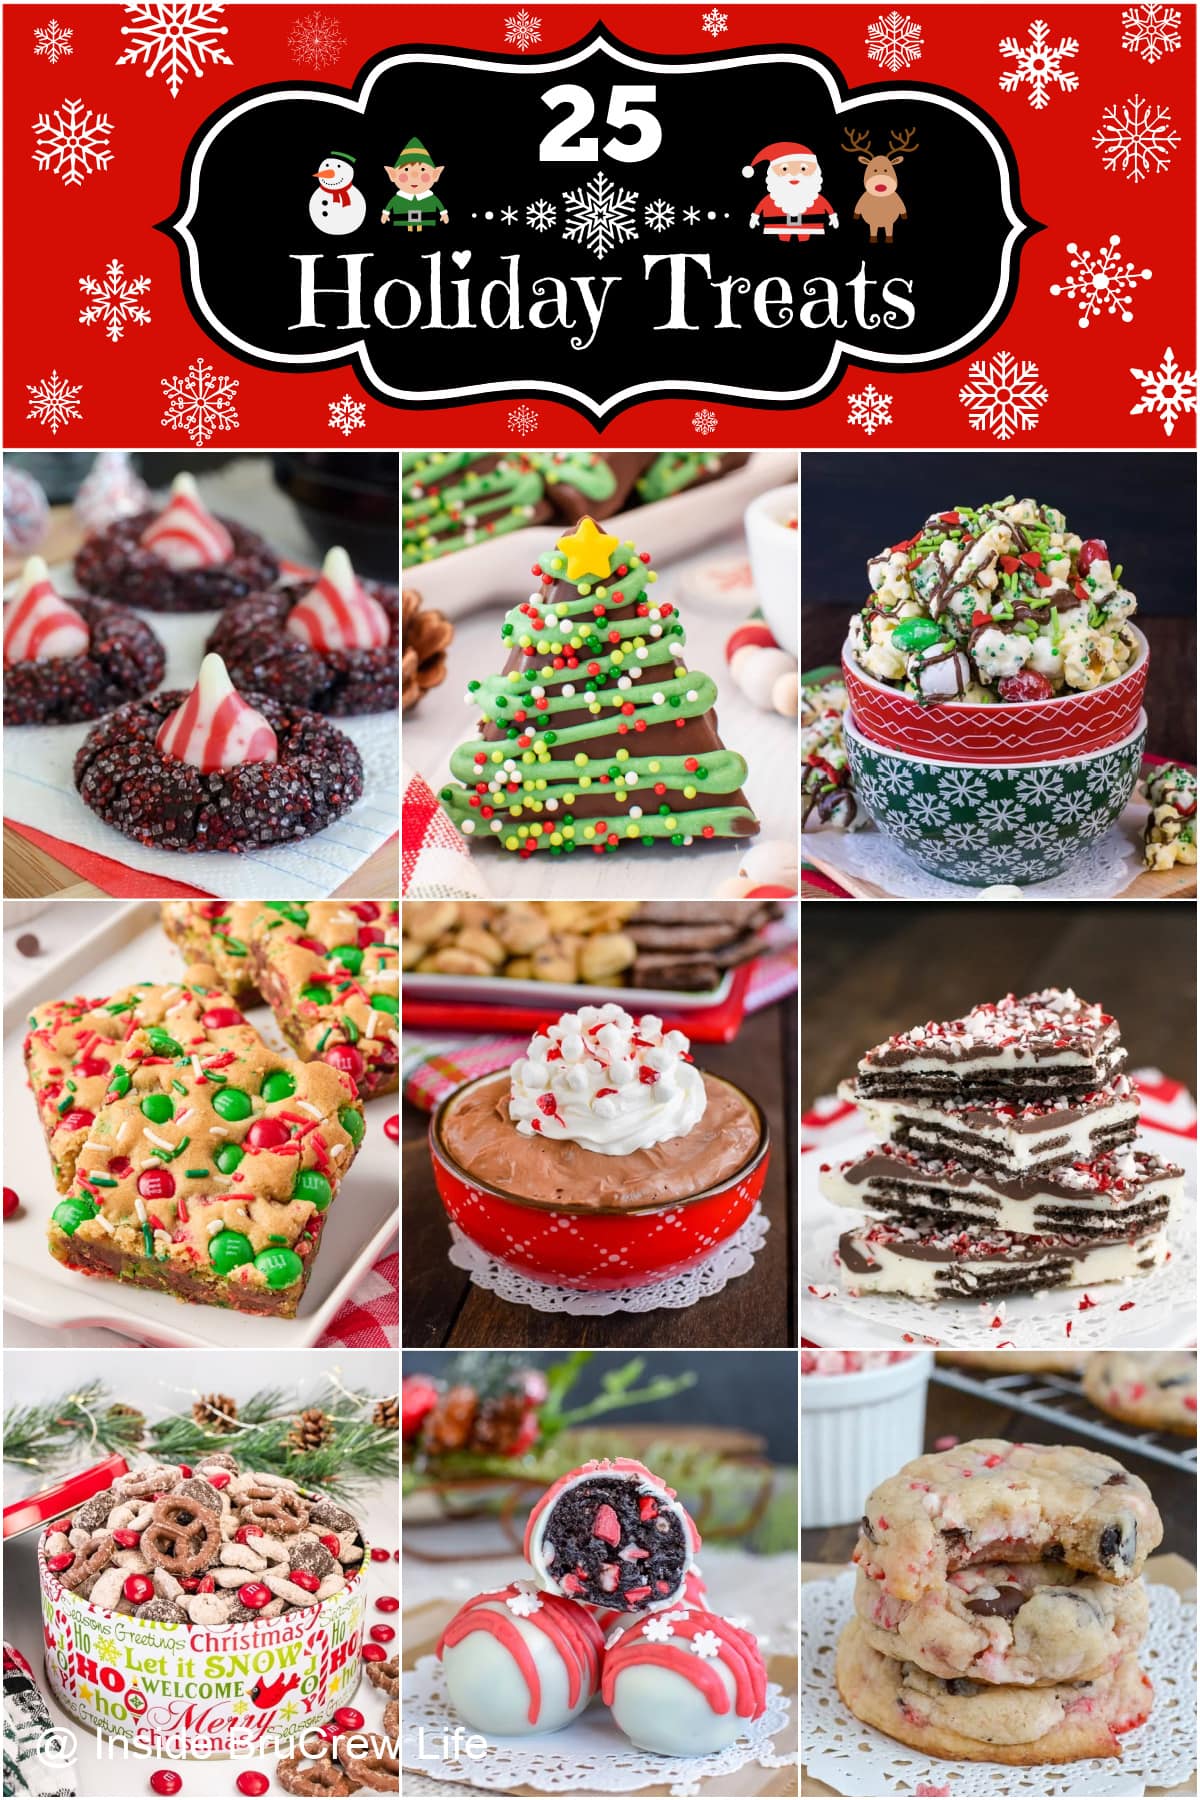 A collage of holiday treats with a red text box.